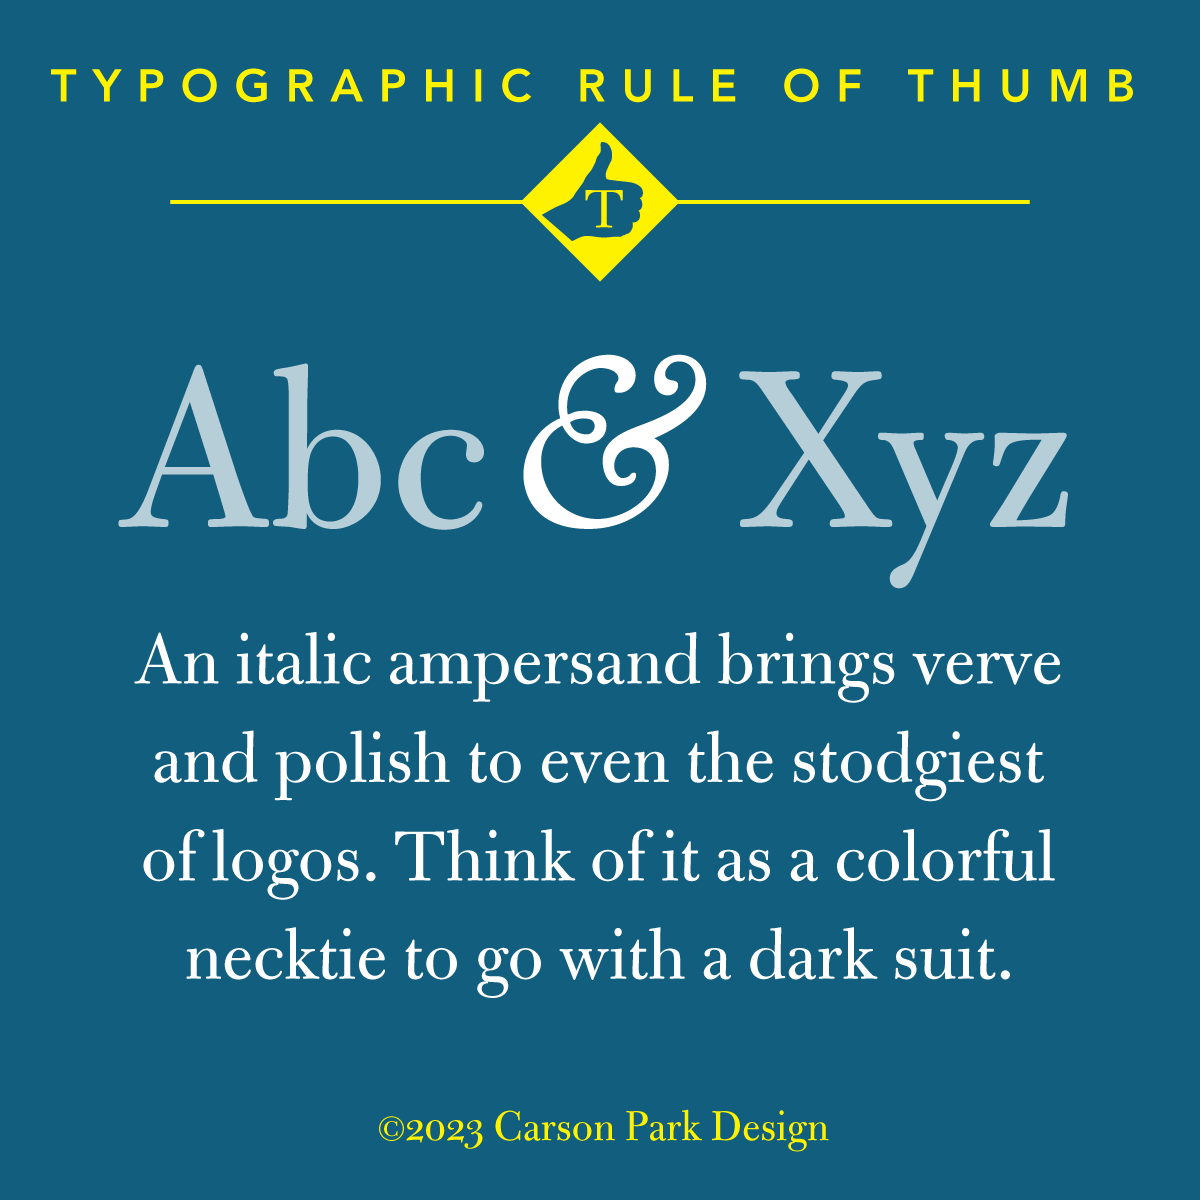 Italic ampersands add verve to a stodgy logo, like a colorful necktie with a dark suit.